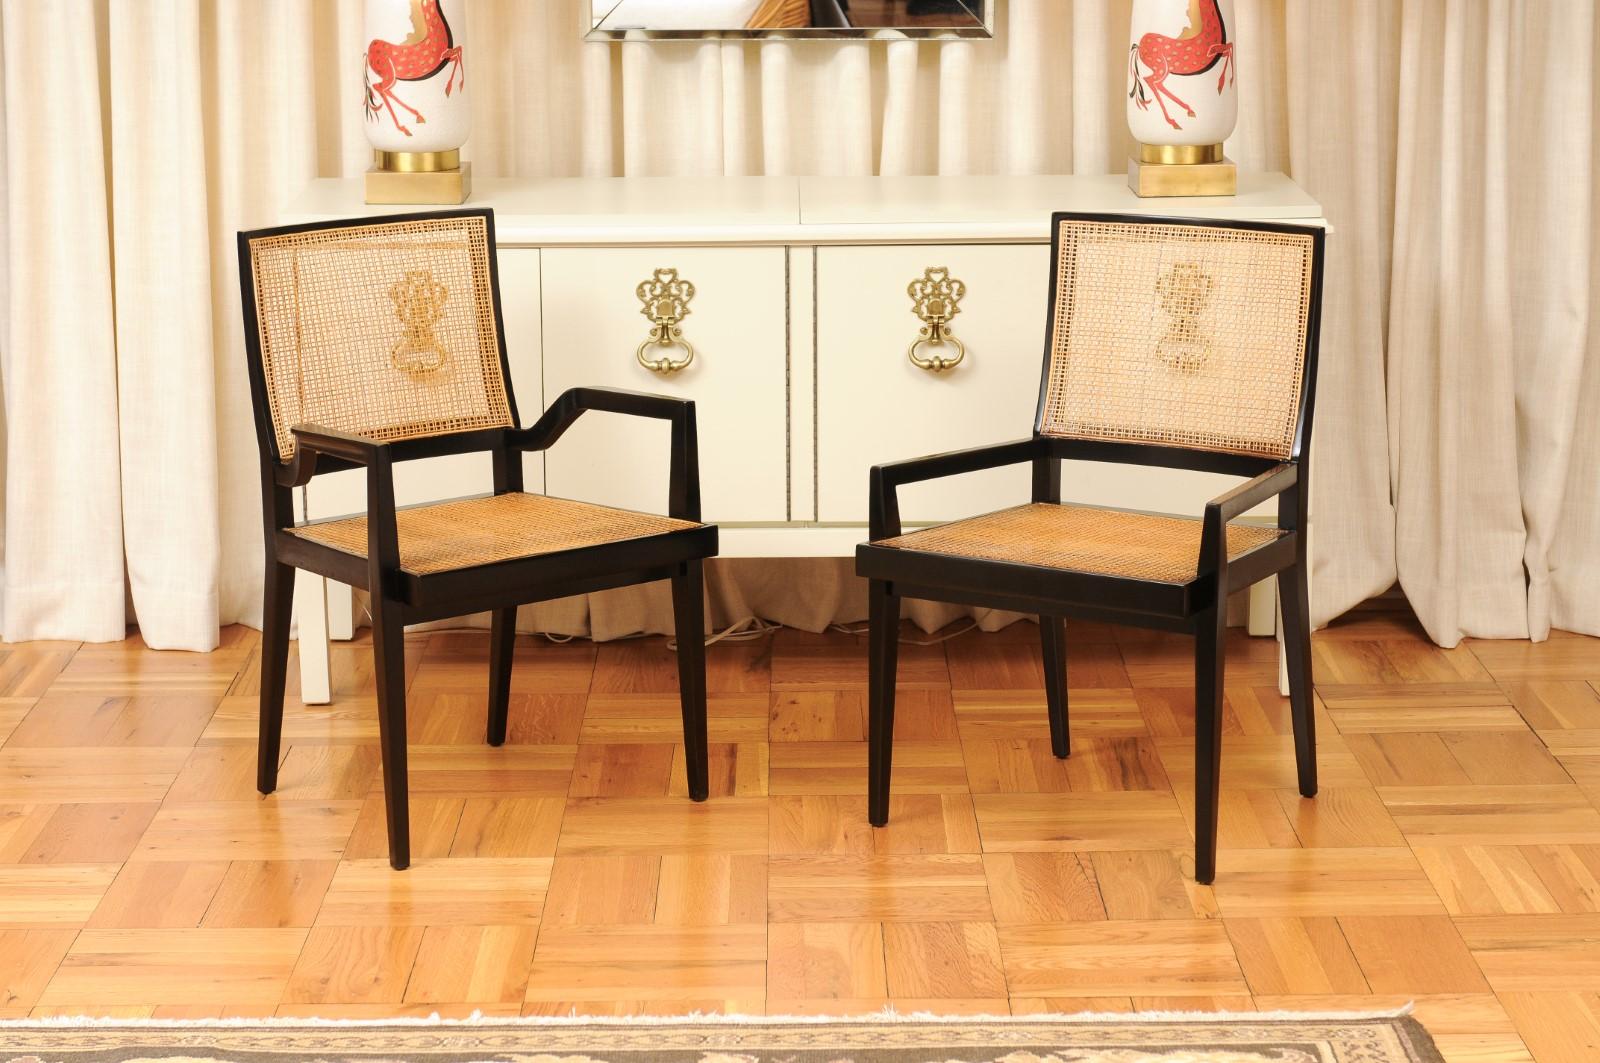 Spectacular Restored Set of 14 Sleek Double Cane Dining Chairs by Michael Taylor For Sale 6